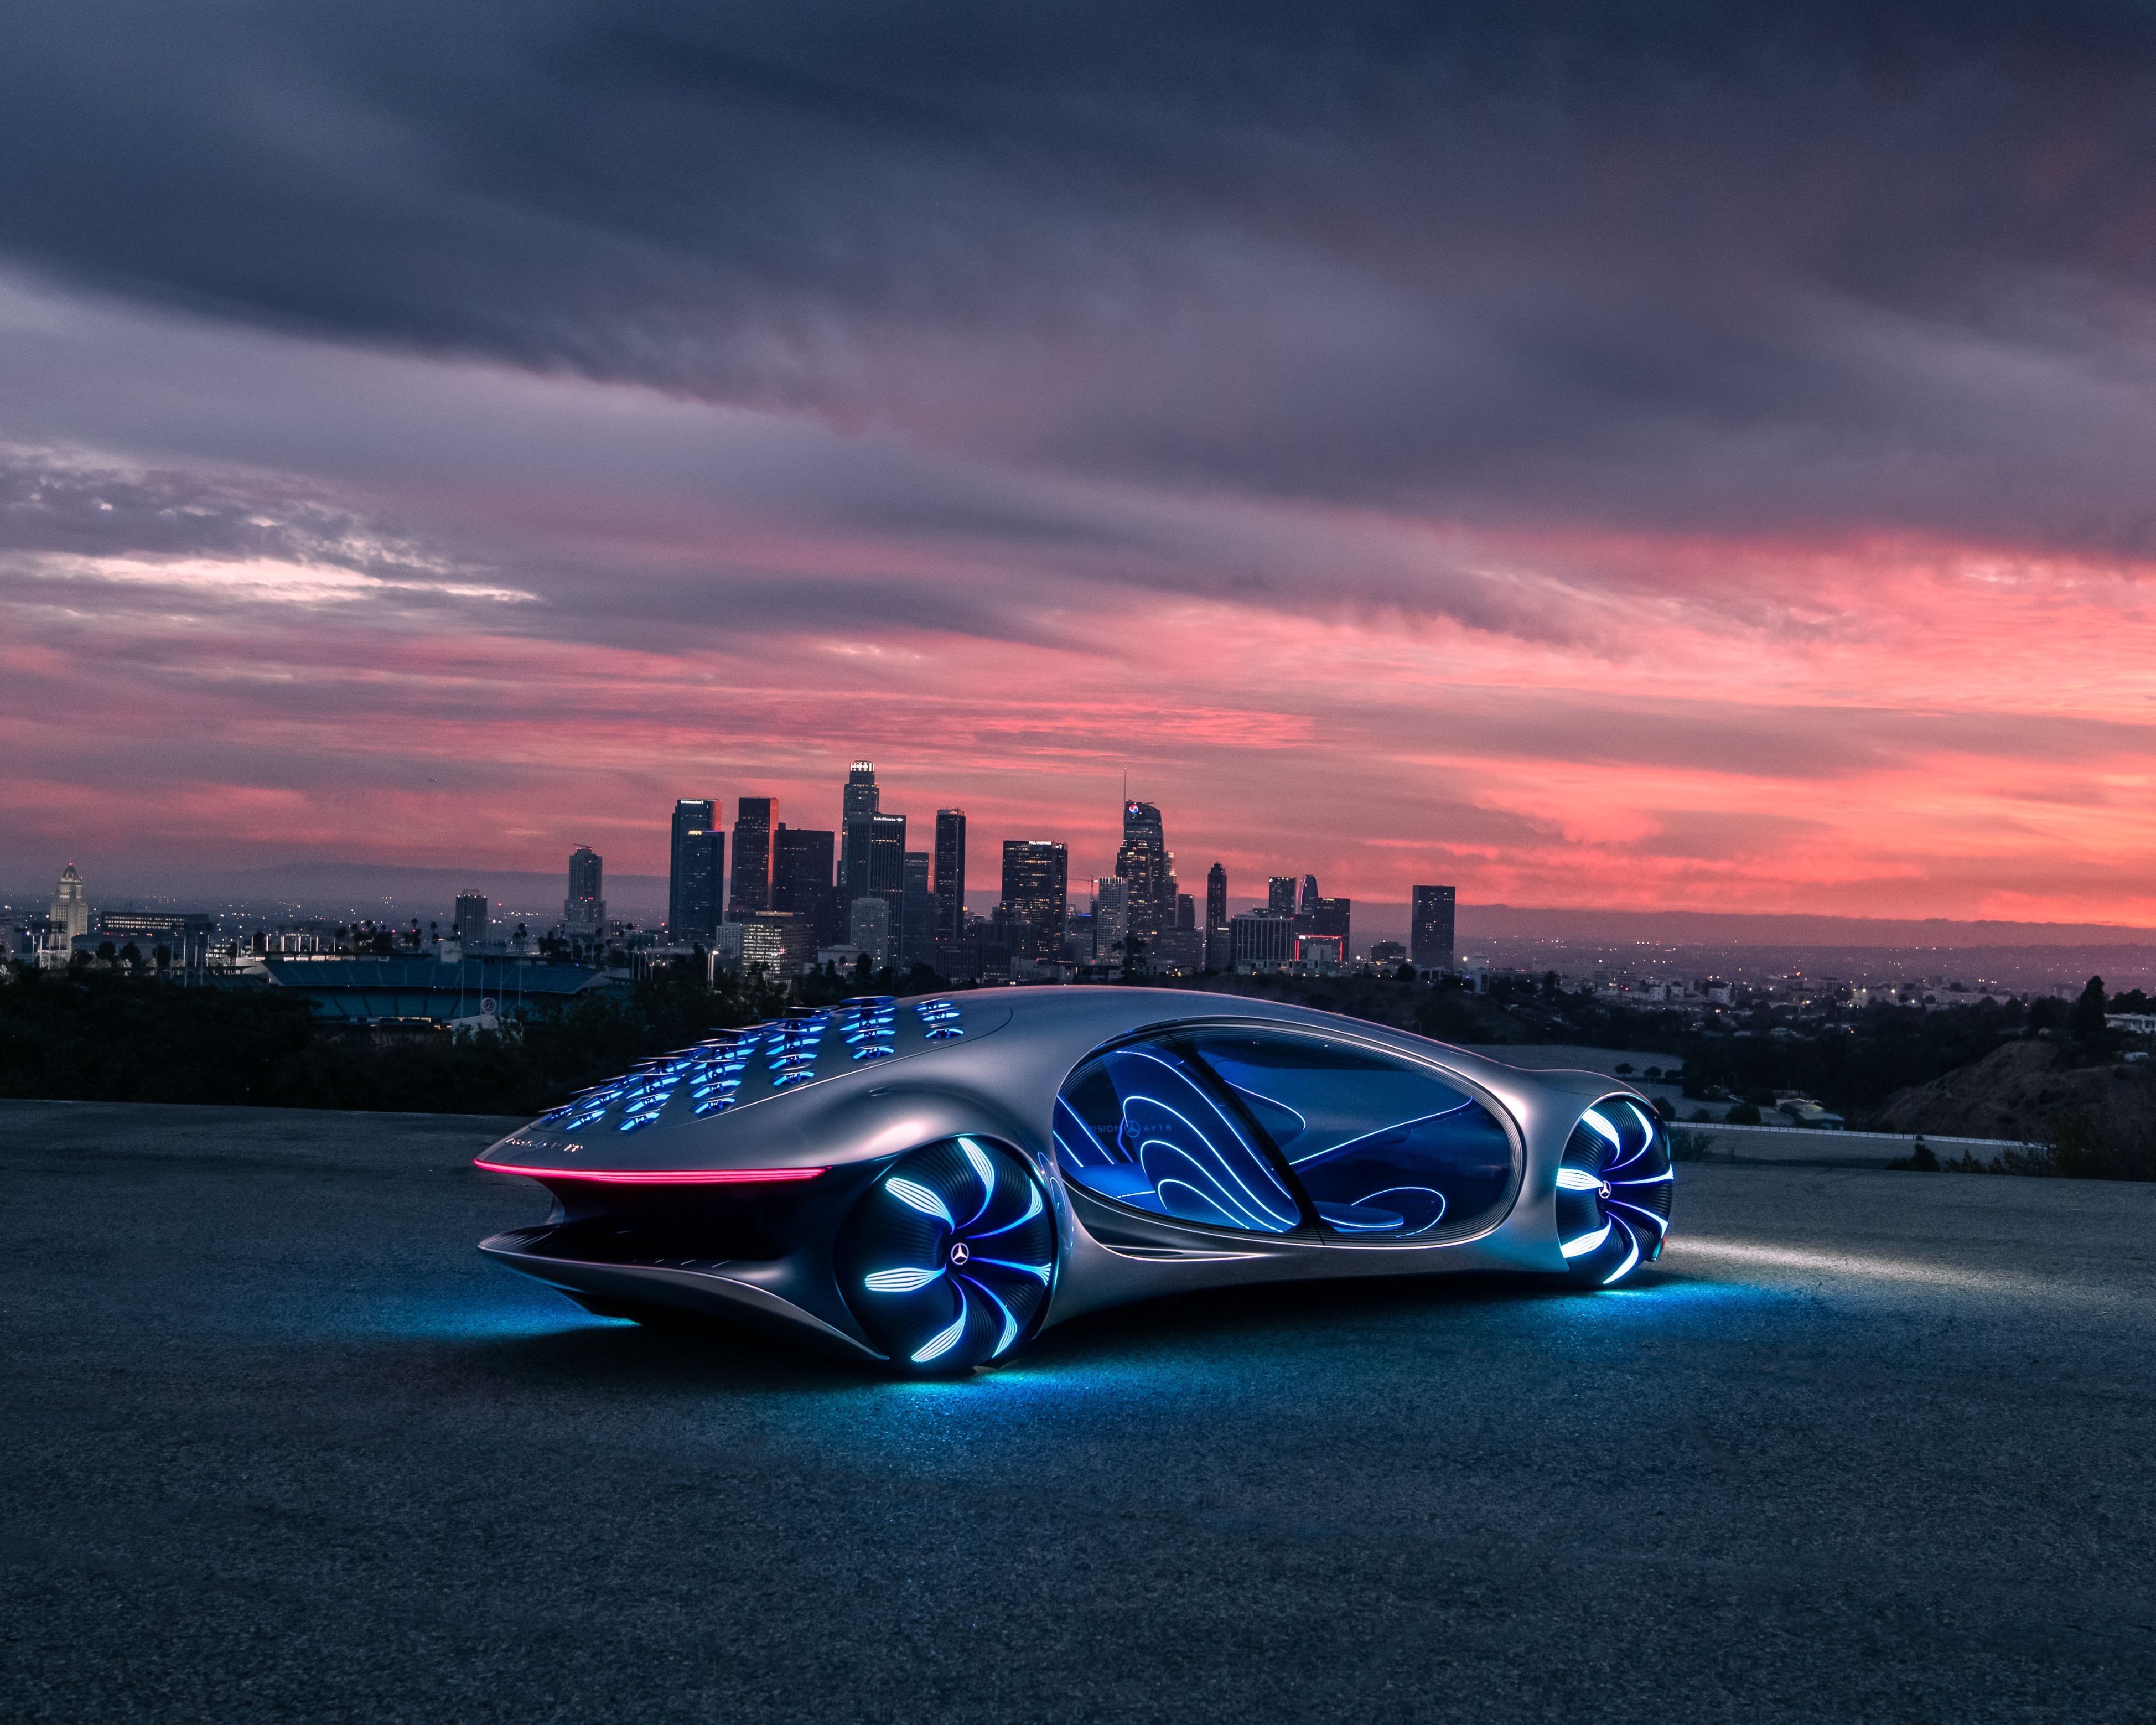 We Drive The Mercedes Benz Vision AVTR Concept Car From Avatar